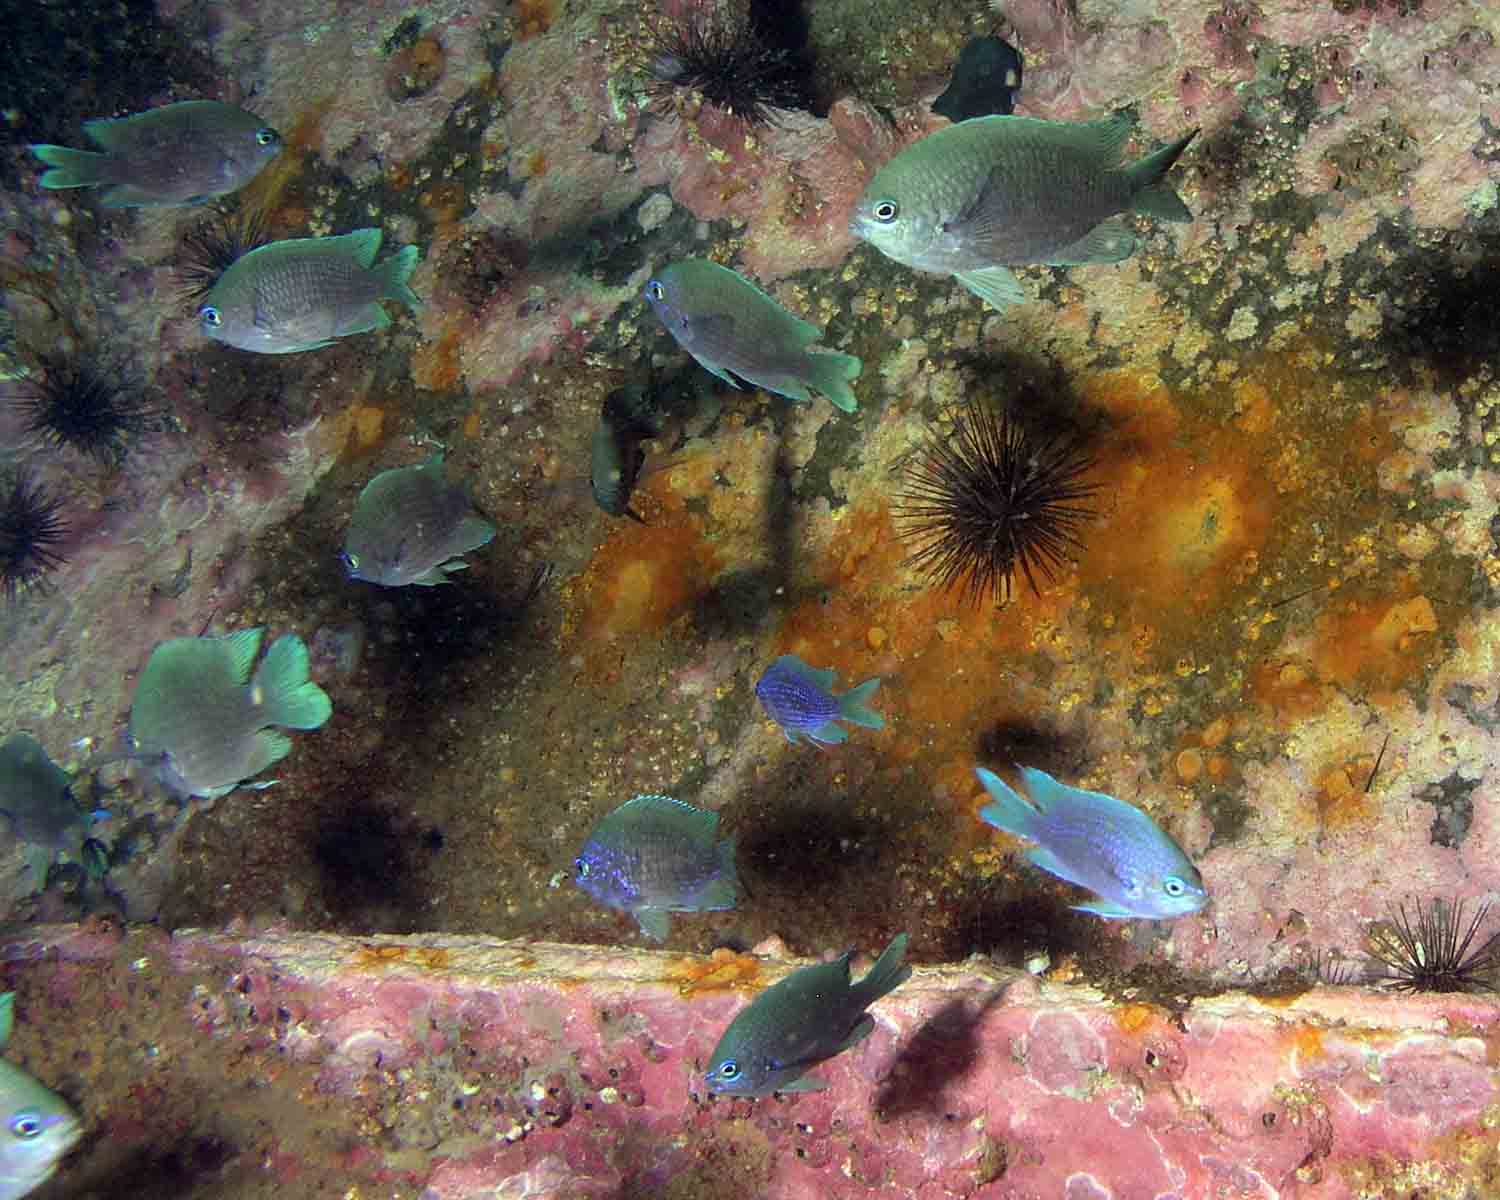 Purple Reeffish, found in great numbers on the wreck